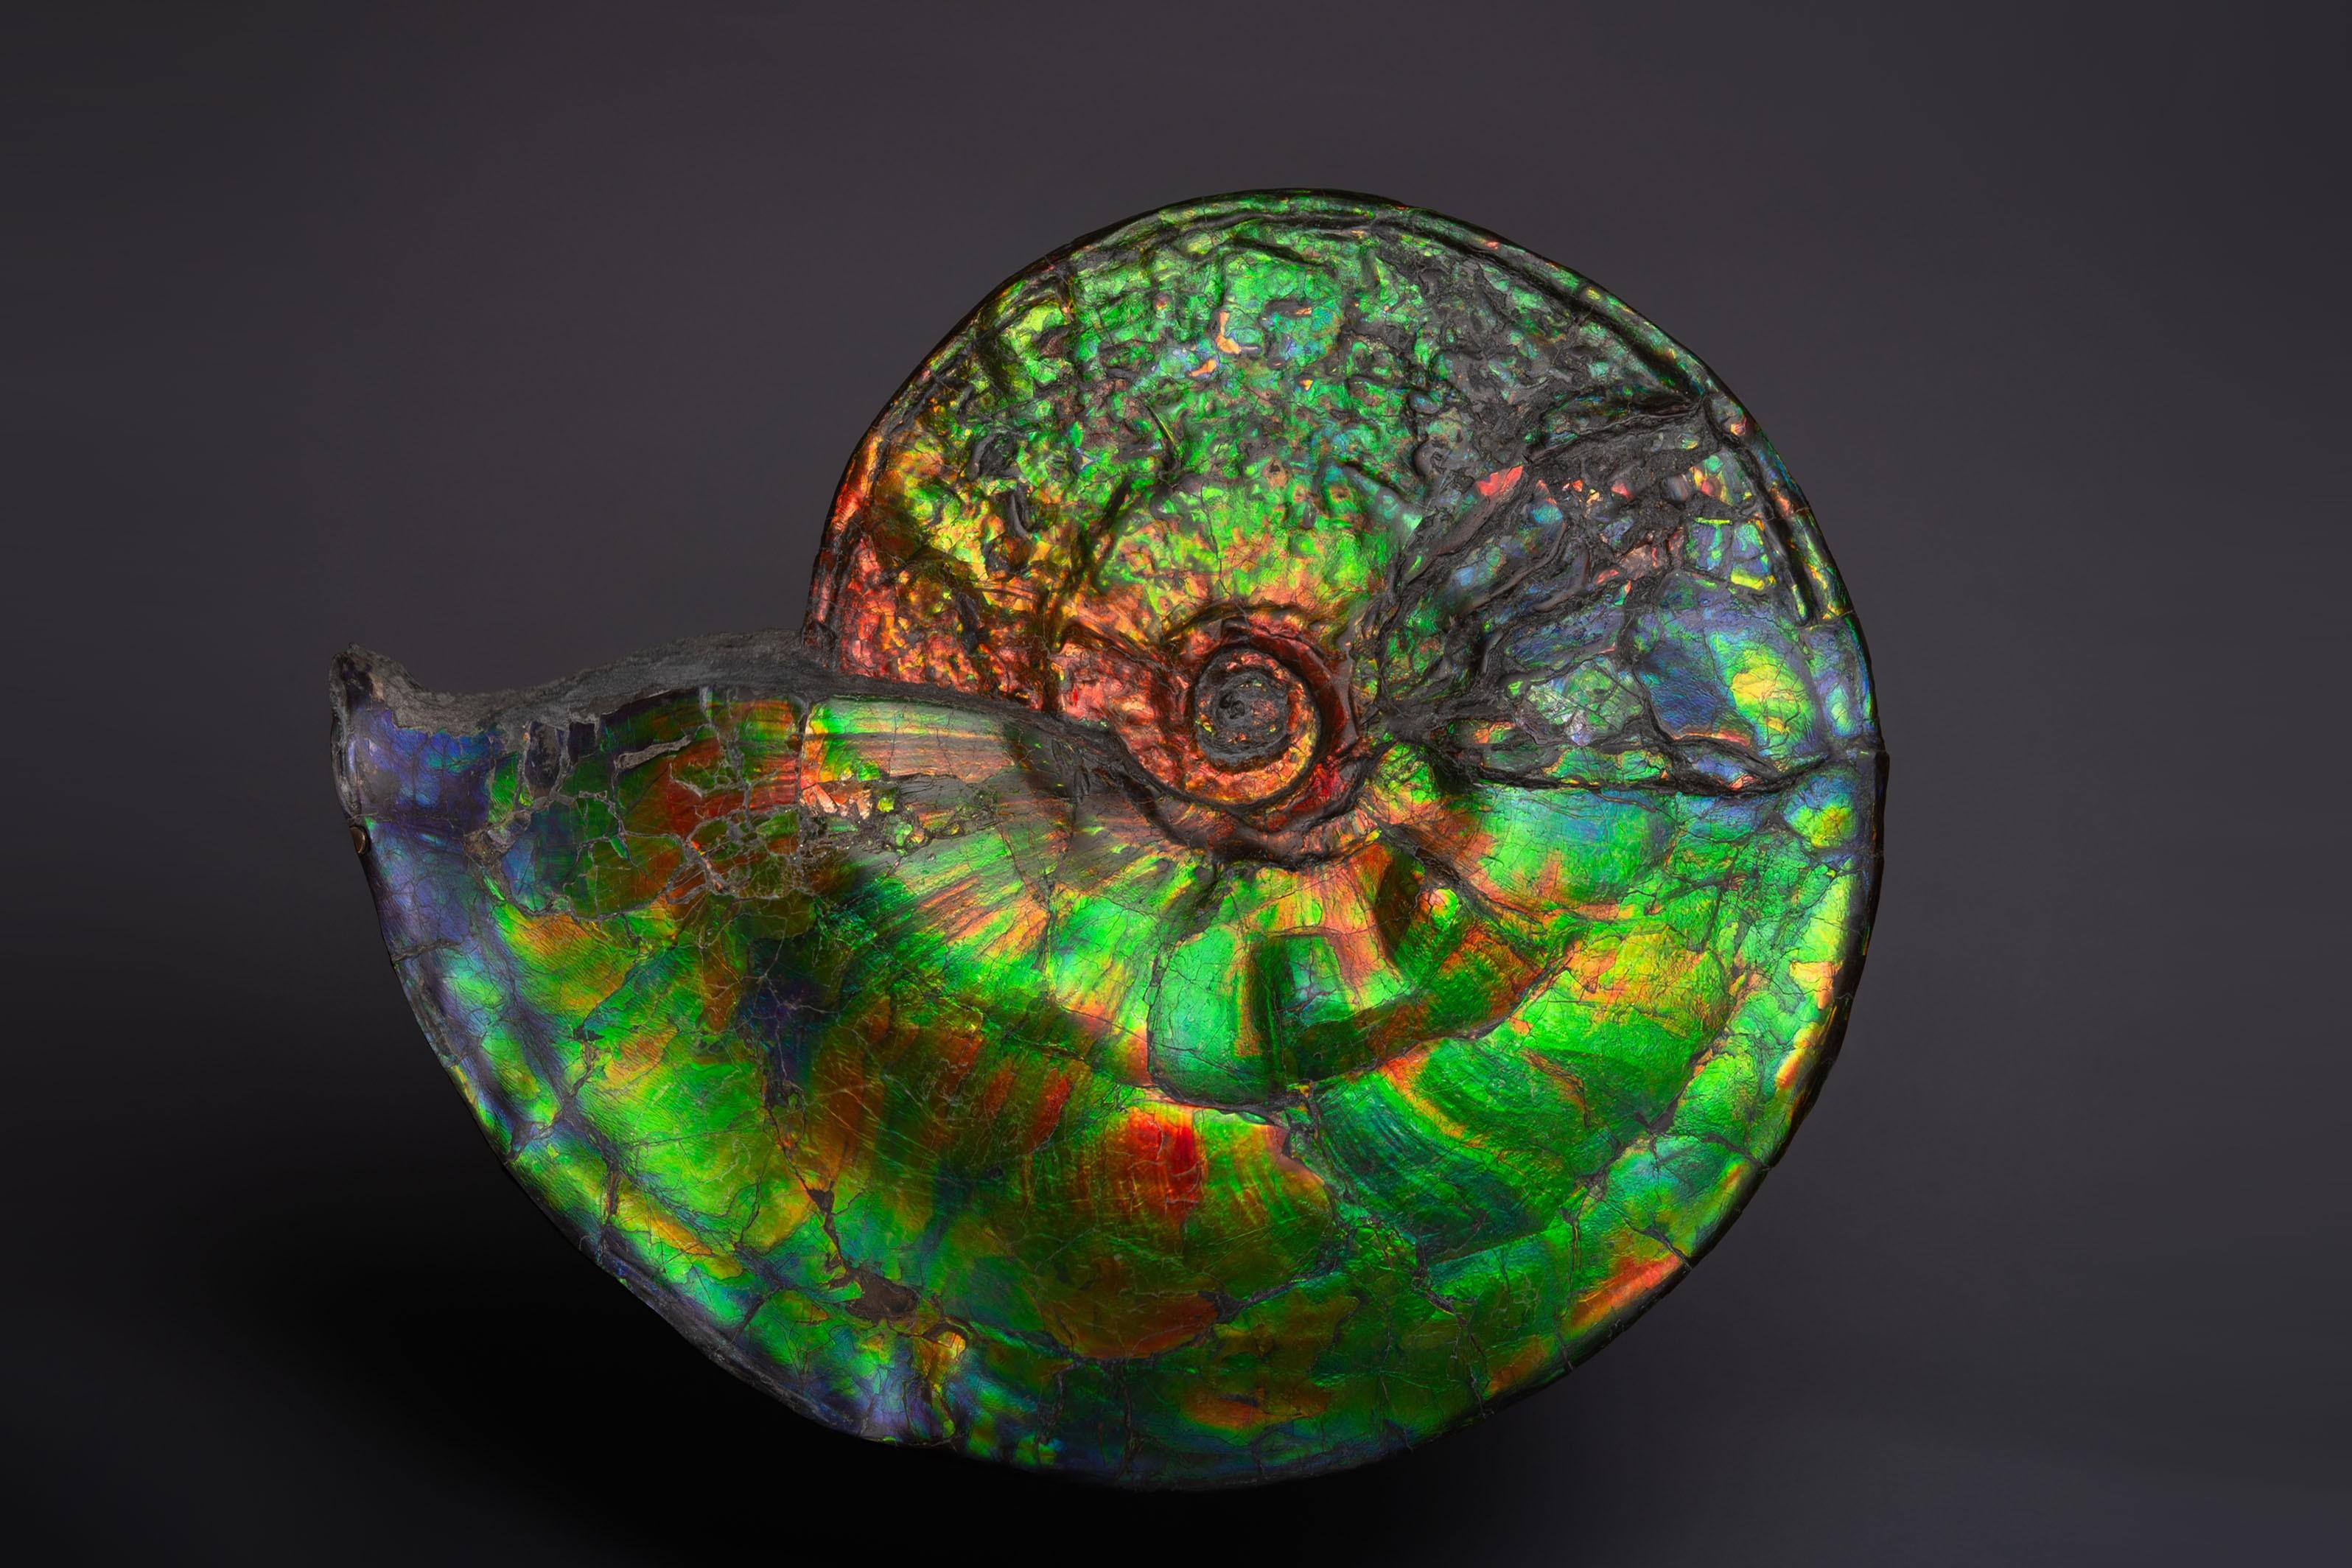 Extraordinary Giant Iridescent Ammonite Fossil - Sculpture by Unknown